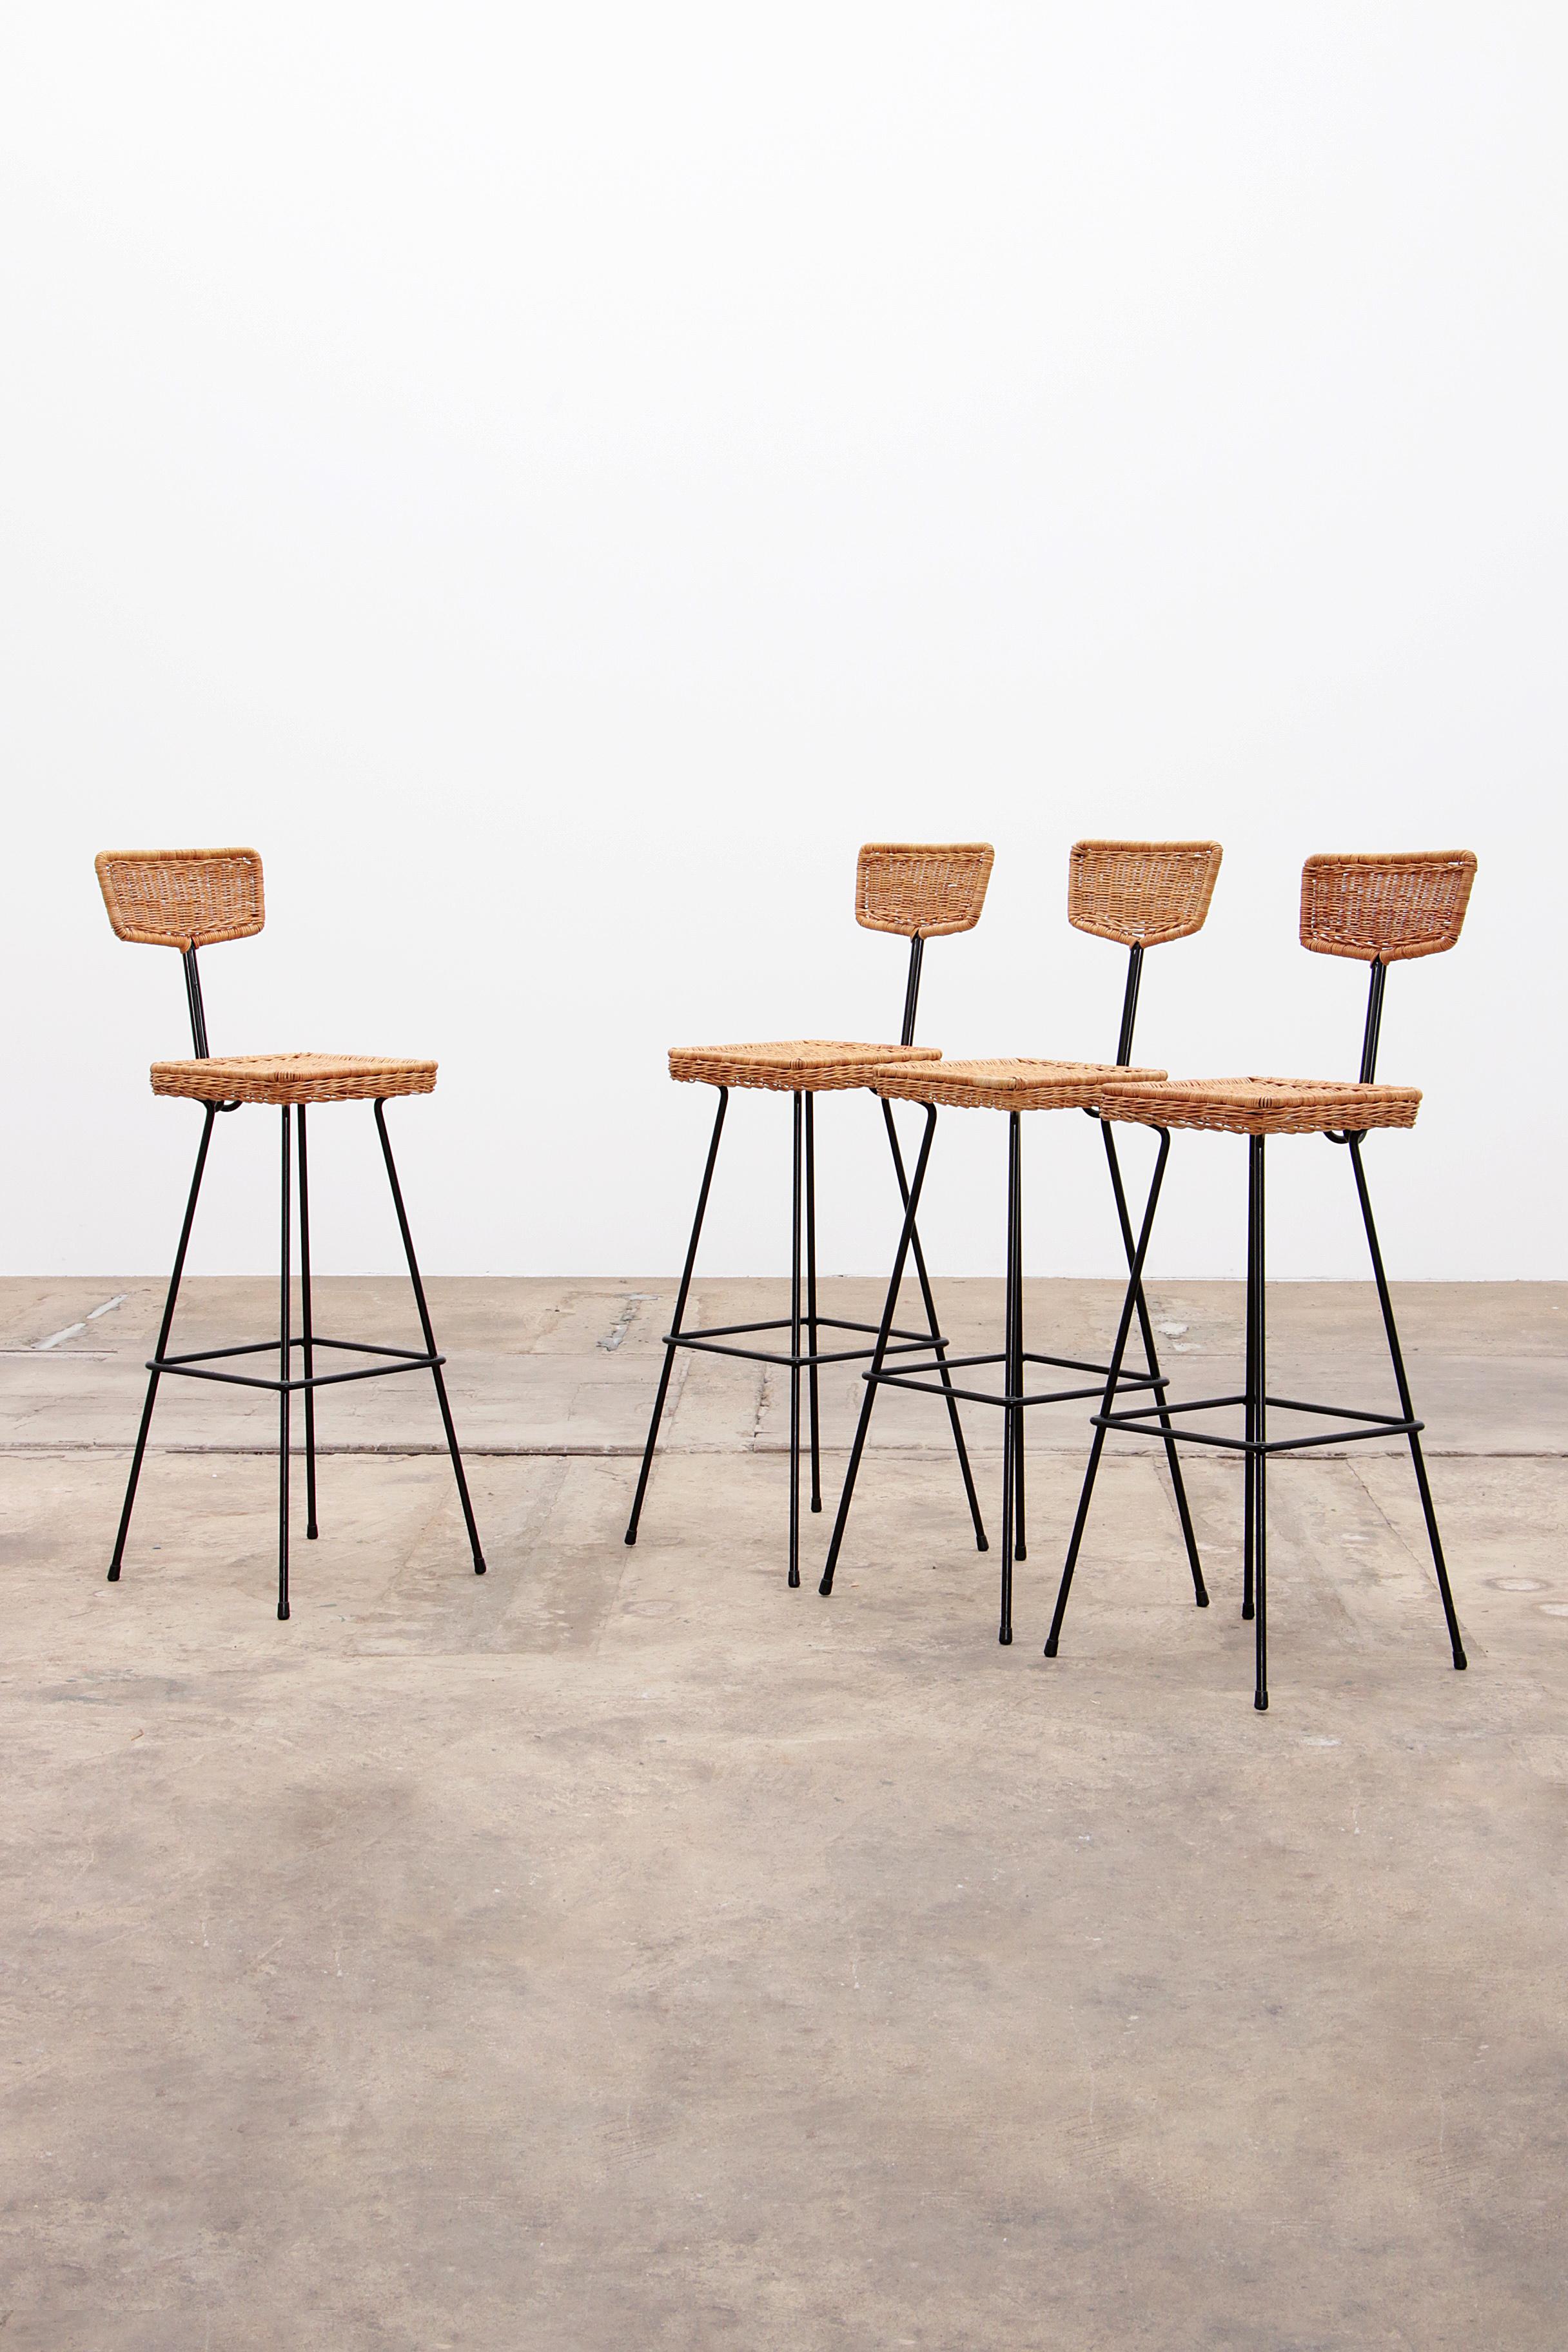 Herta Maria Witzemann Set off 4 bar stools Erwin Behr Germany 1950


Fantastic set of 4 bar stools designed by Prof. Herta-Maria Witzemann and manufactured by Erwin Behr, Germany 1950. The stools have solid metal frames painted black and hand-woven